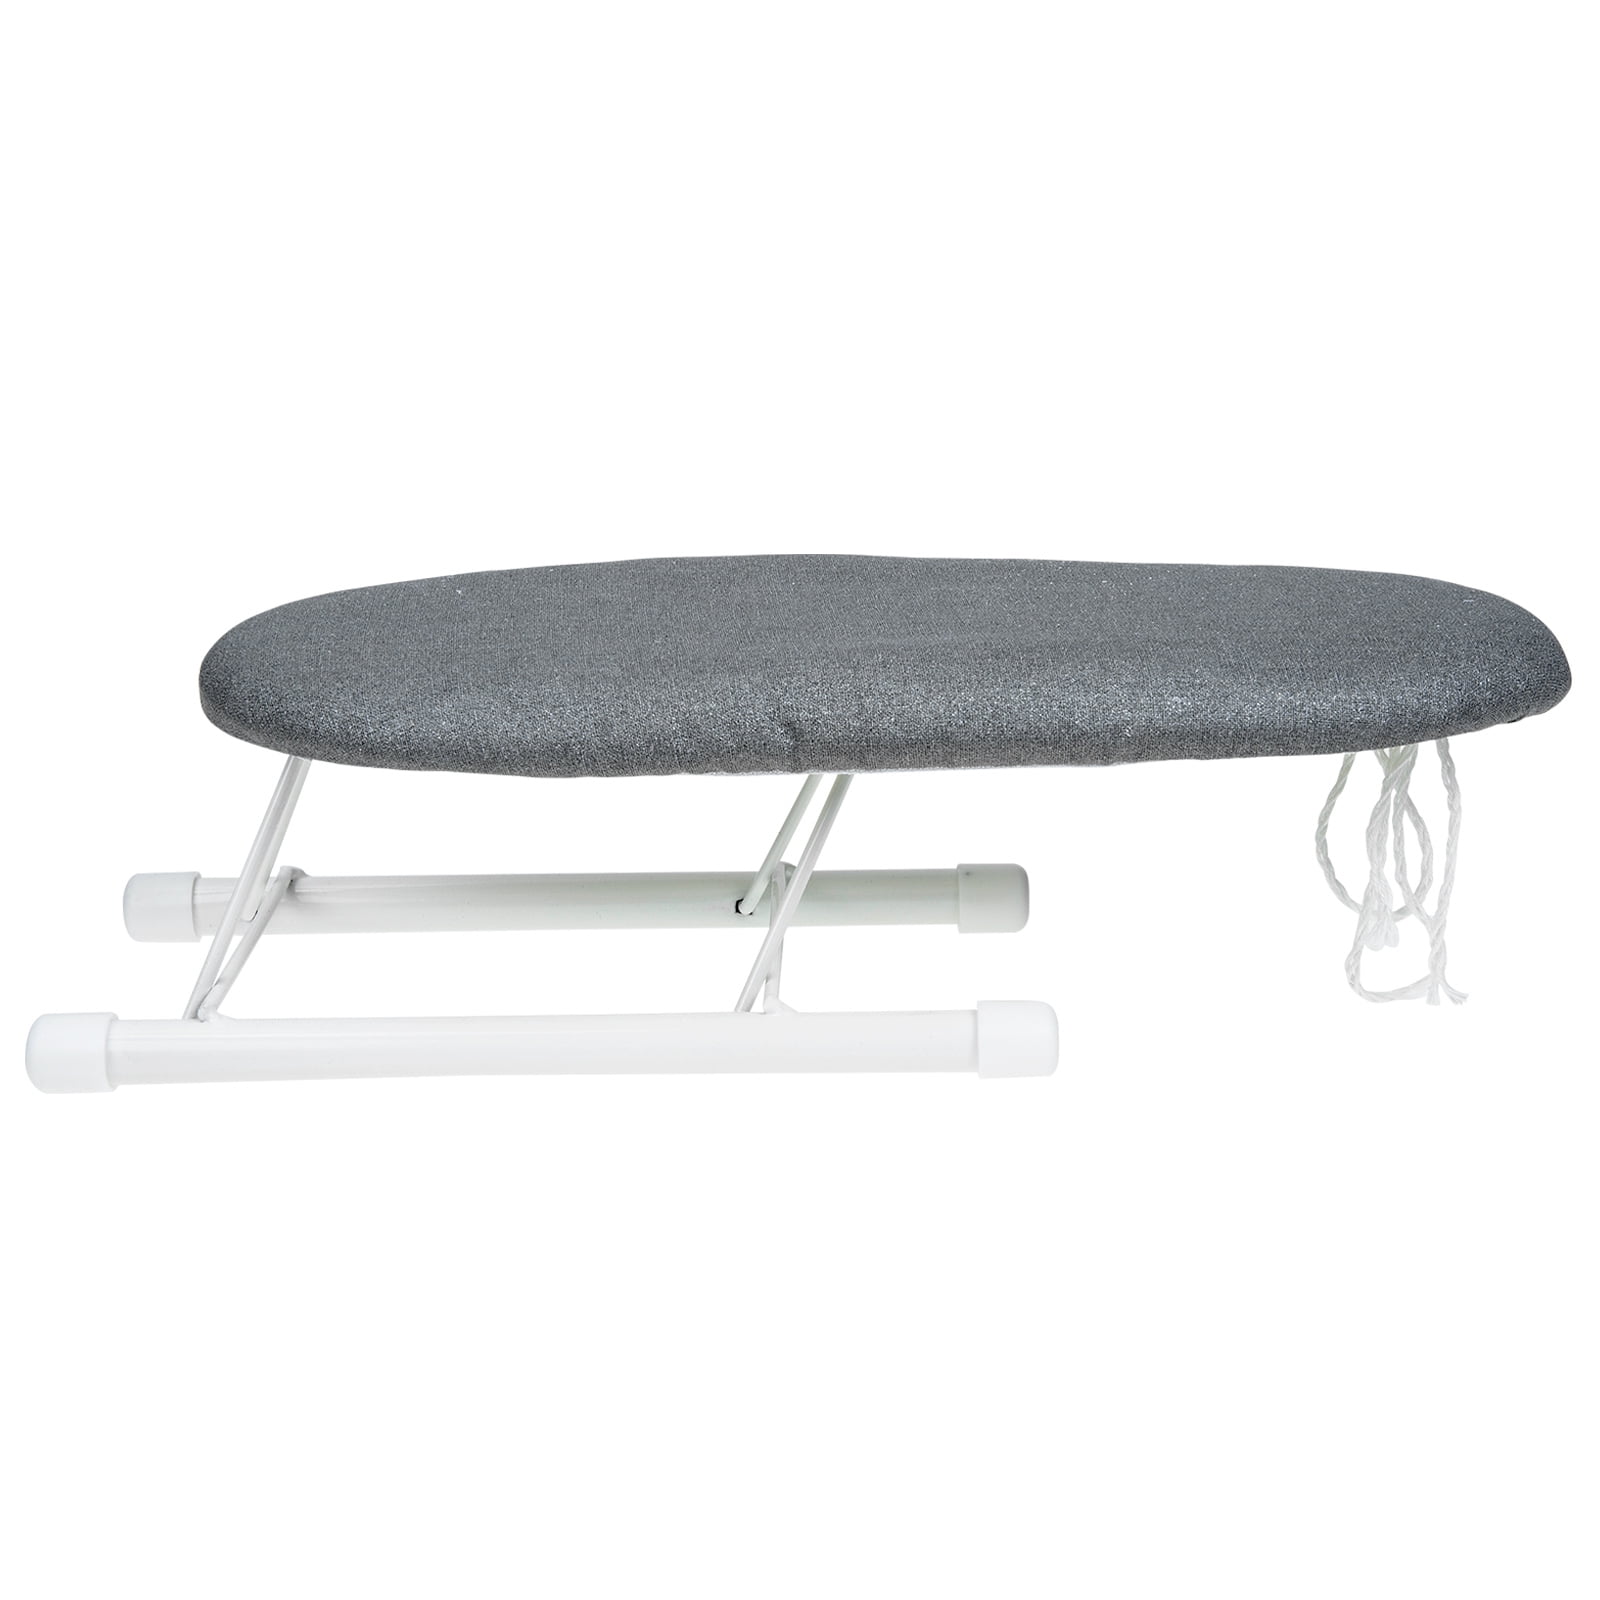 Folding Sleeve Ironing Board Foldable Ironing Board Small Clothes Ironing  Table